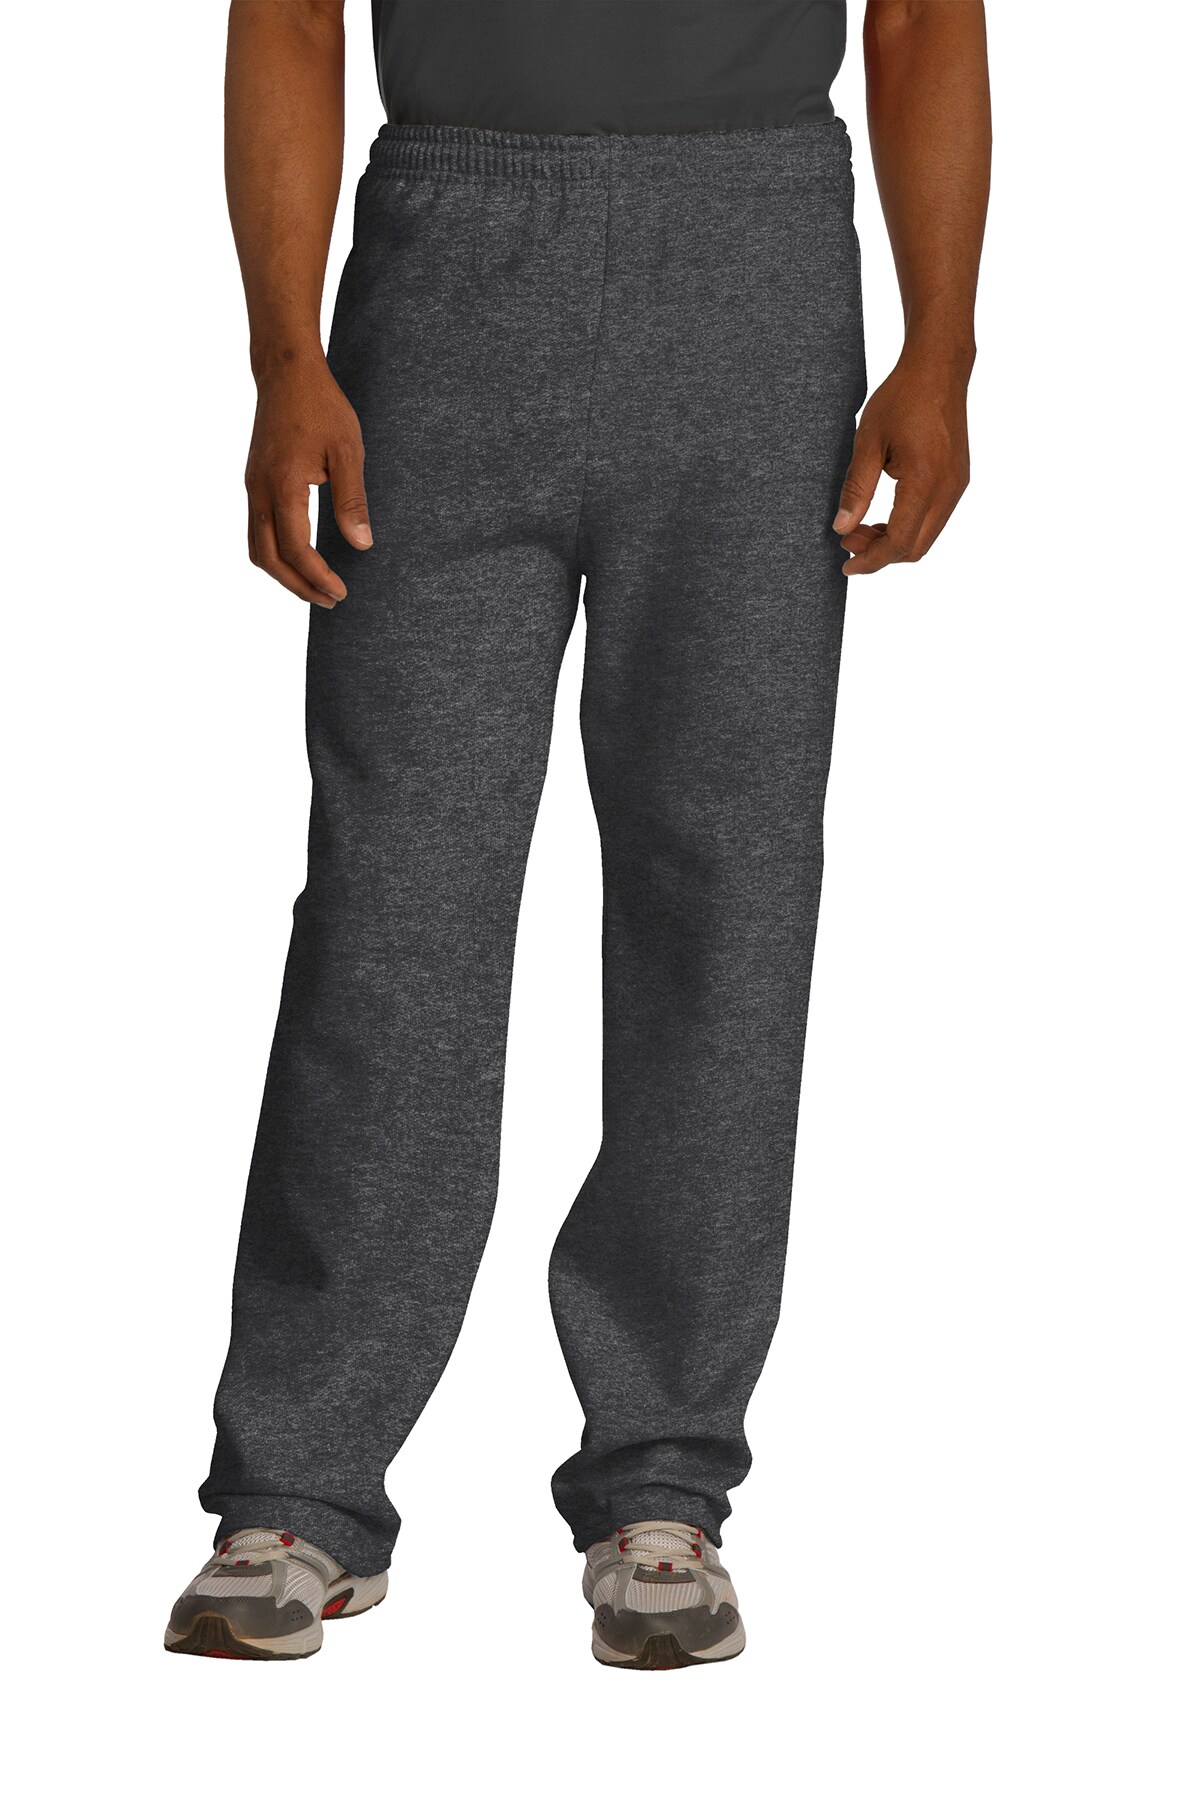 JERZEES&#xAE; Nublend Open Bottom Pant with Pockets